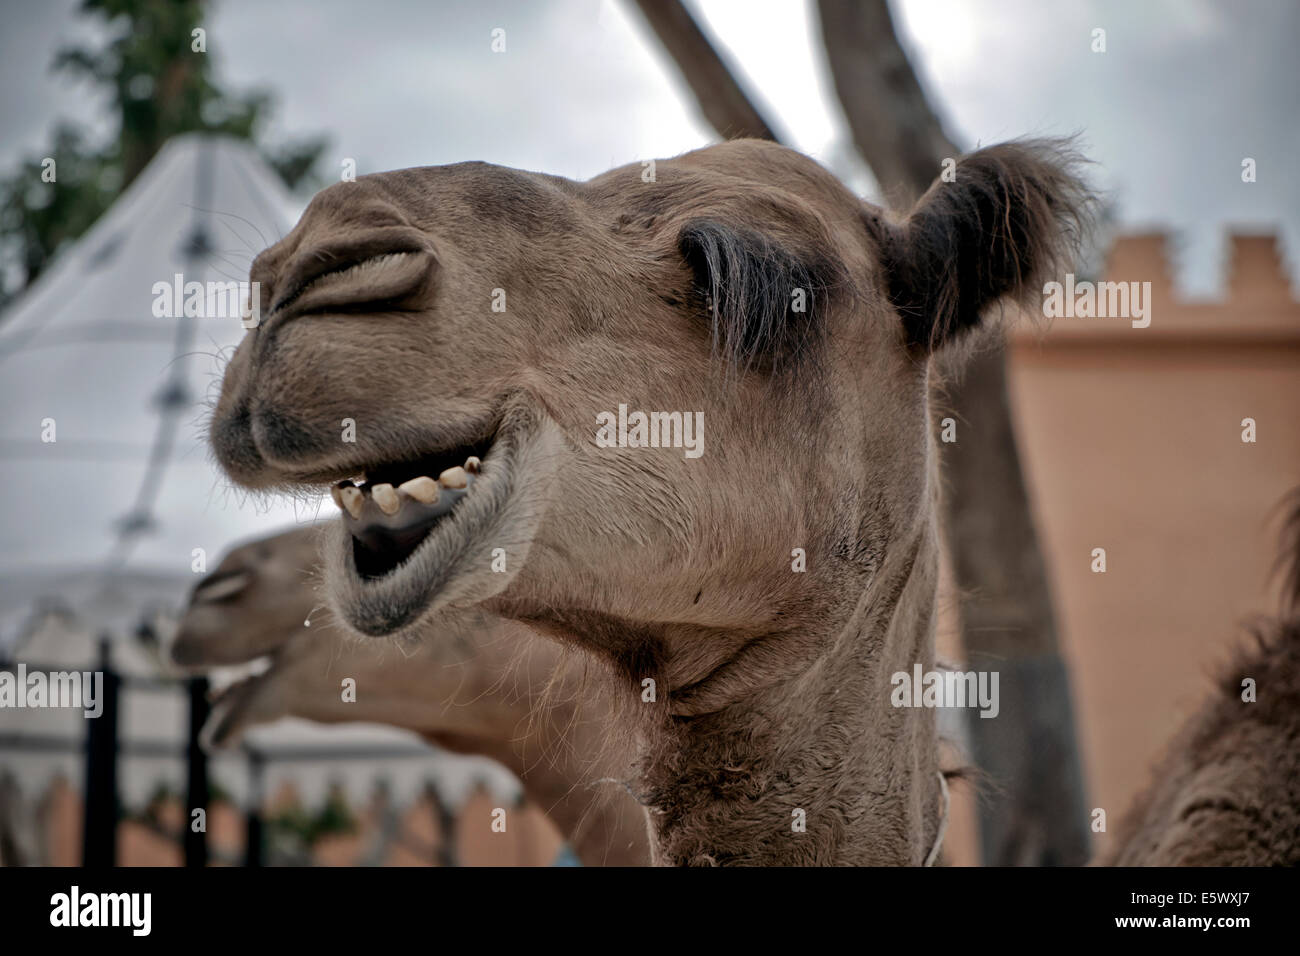 Camel funny animal face laughing Stock Photo